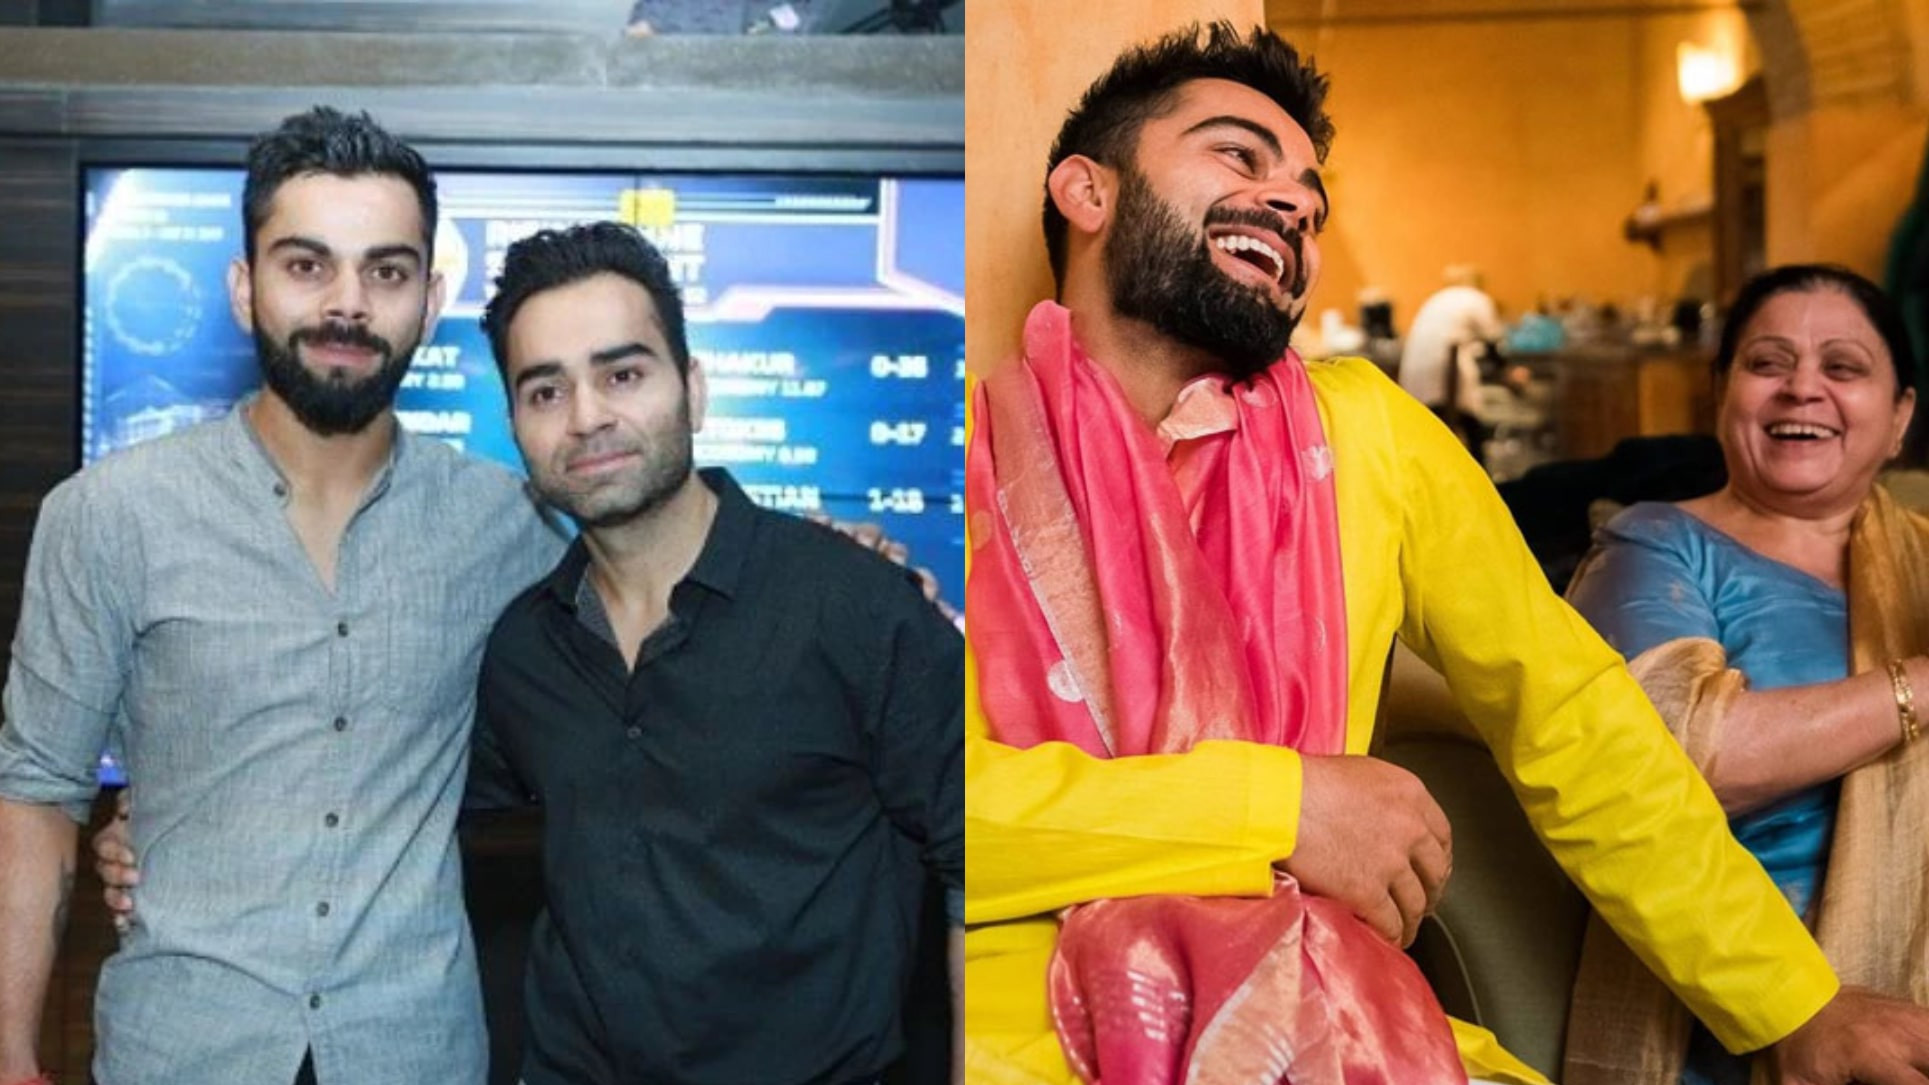 Virat Kohli’s brother Vikas refutes rumors about mother’s ill health; asks fans, media to not spread fake news